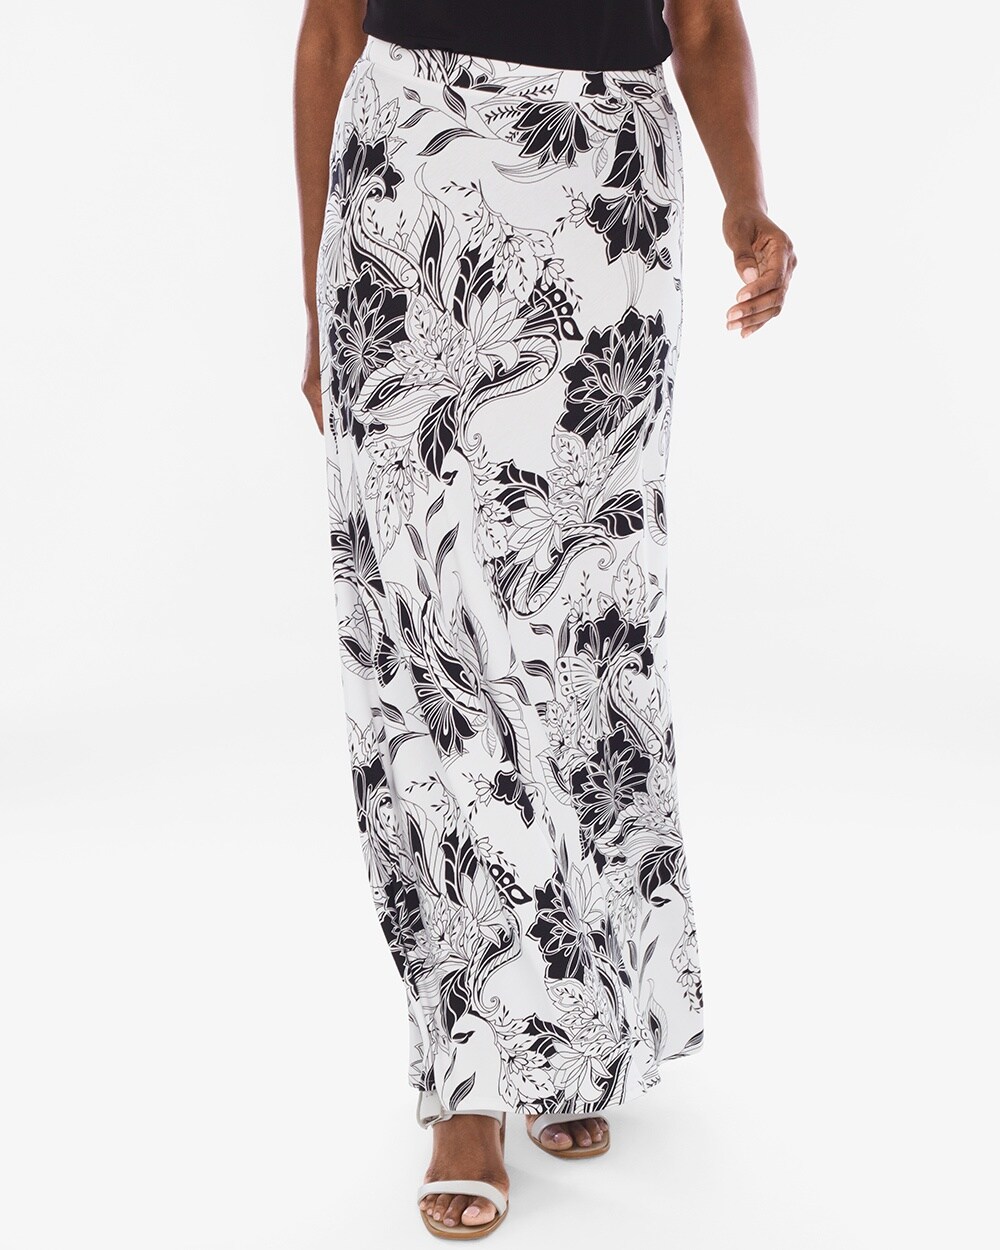 Black and White Floral Maxi Skirt